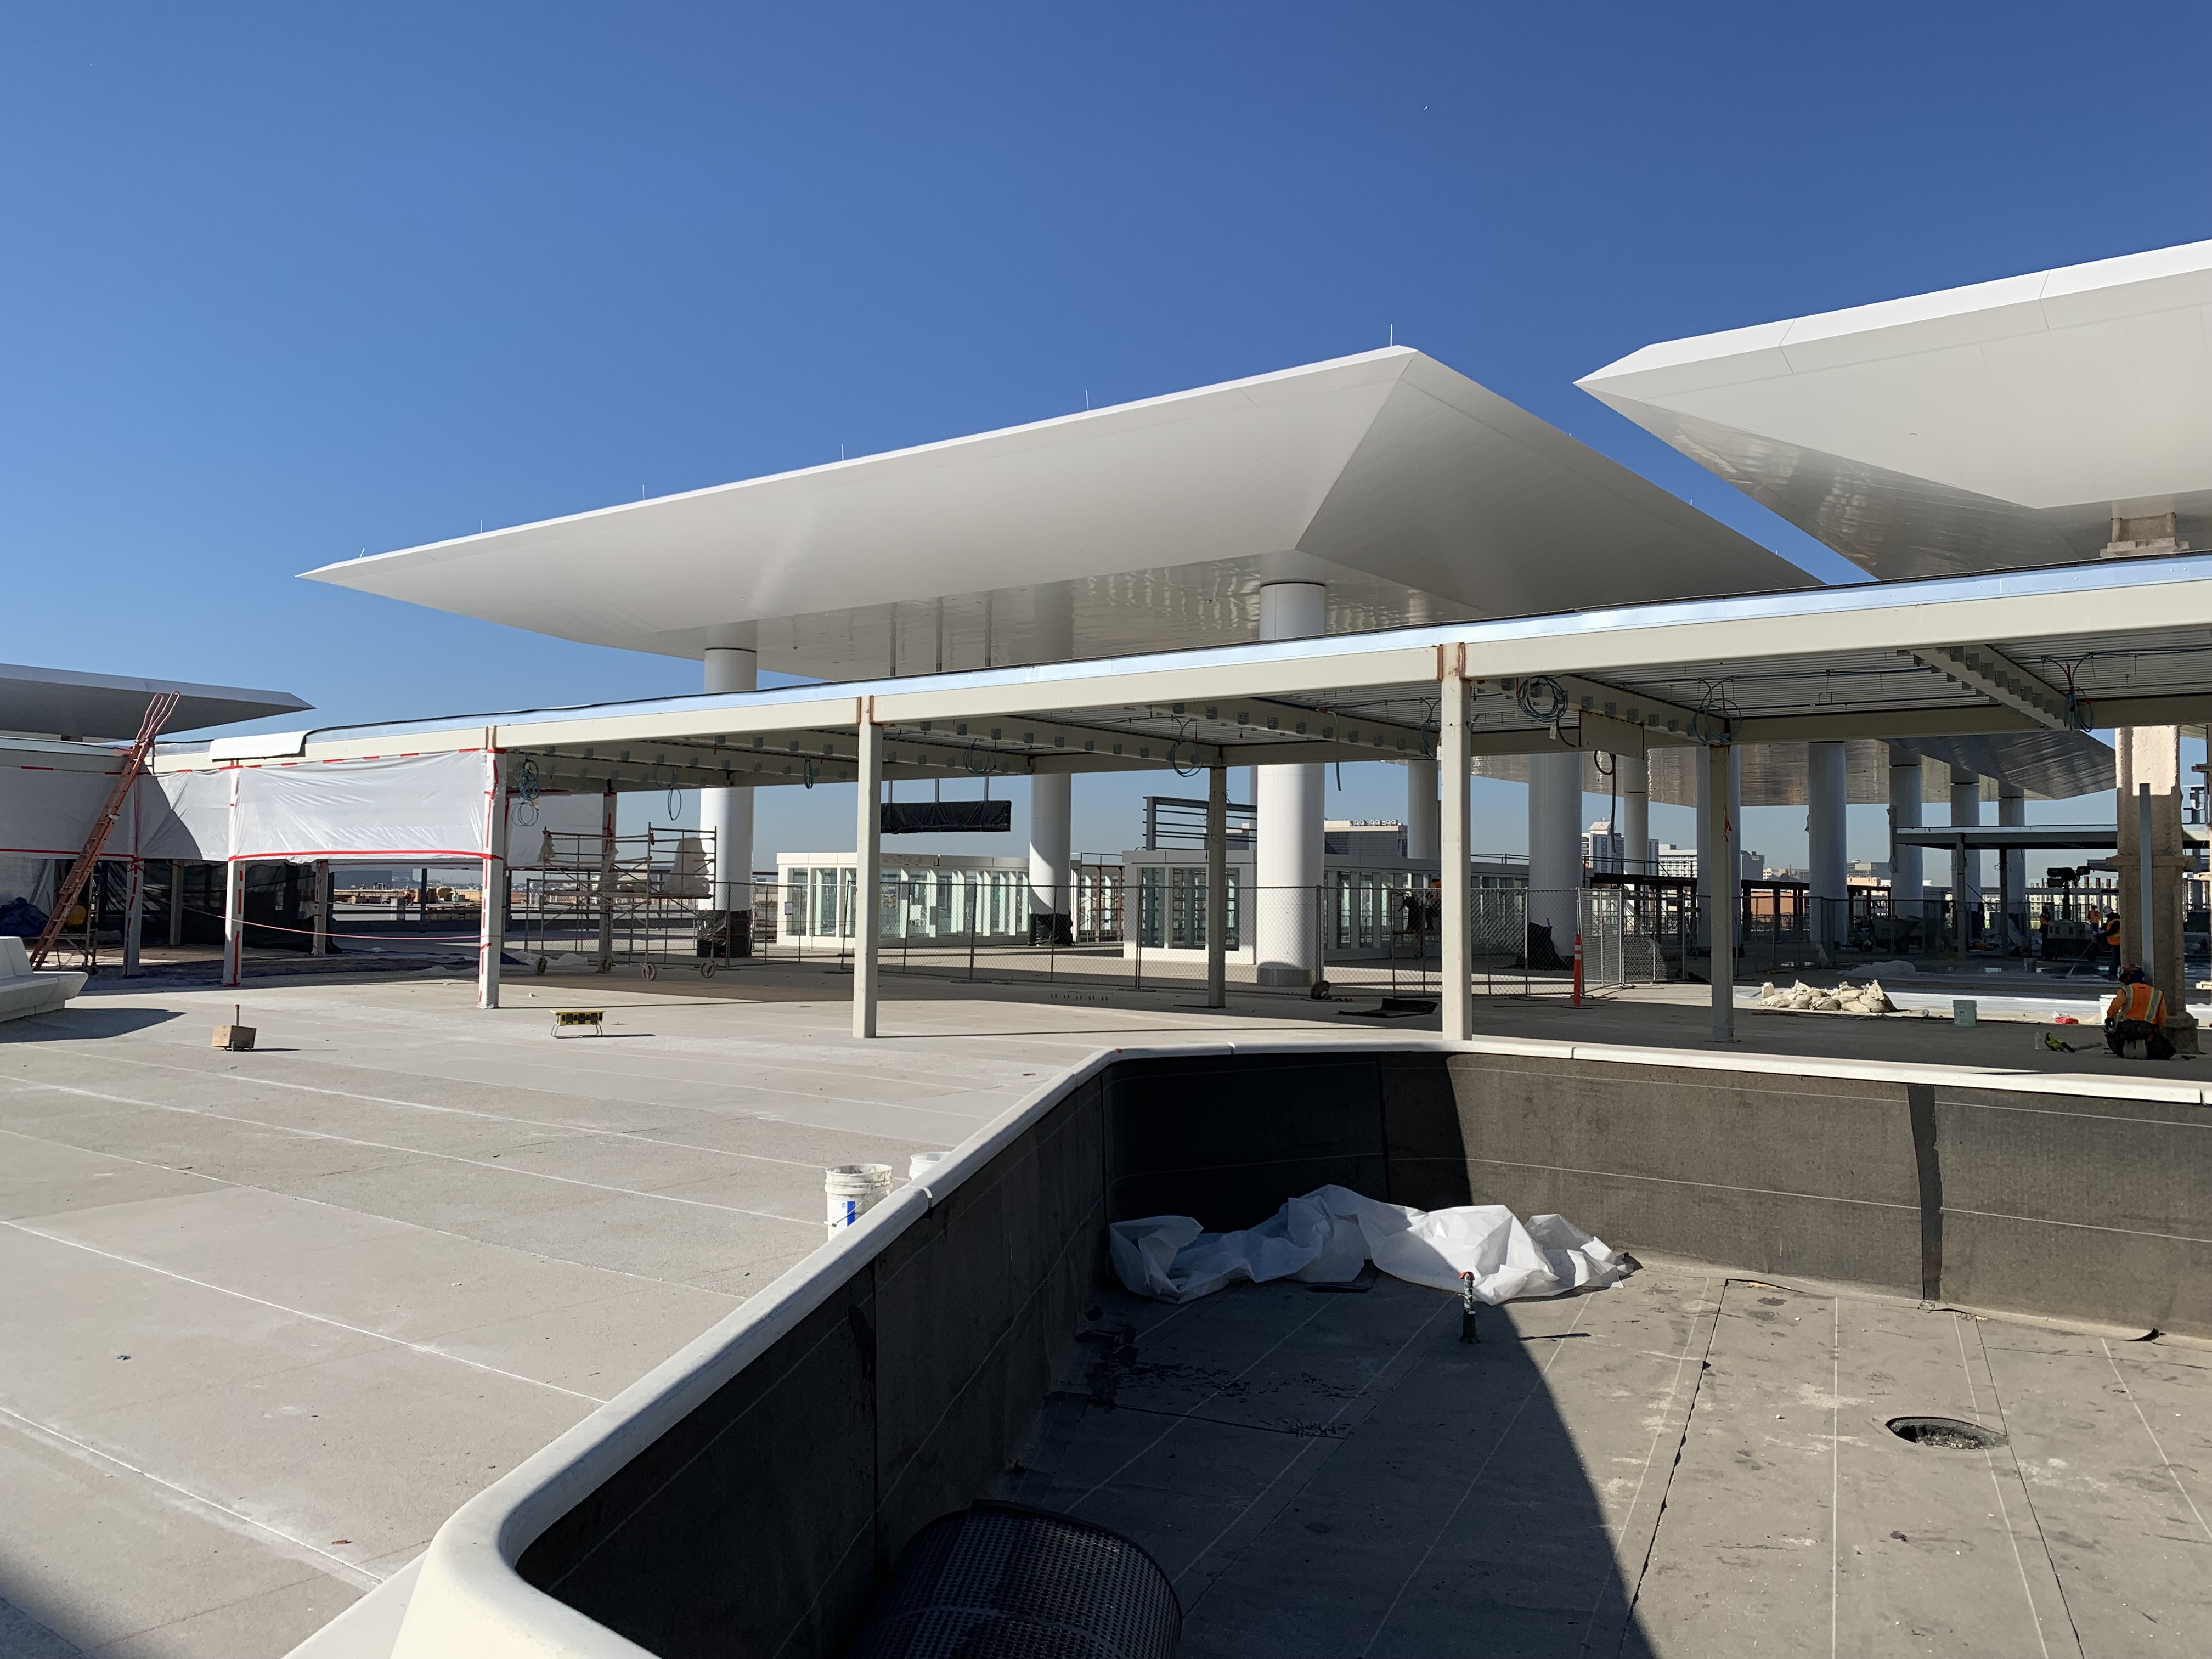 A customer service plaza precast planter bench, in front of the Automated People Mover station, on the top-level of Consolidated Rent-A-Car facility’s Ready Return building.